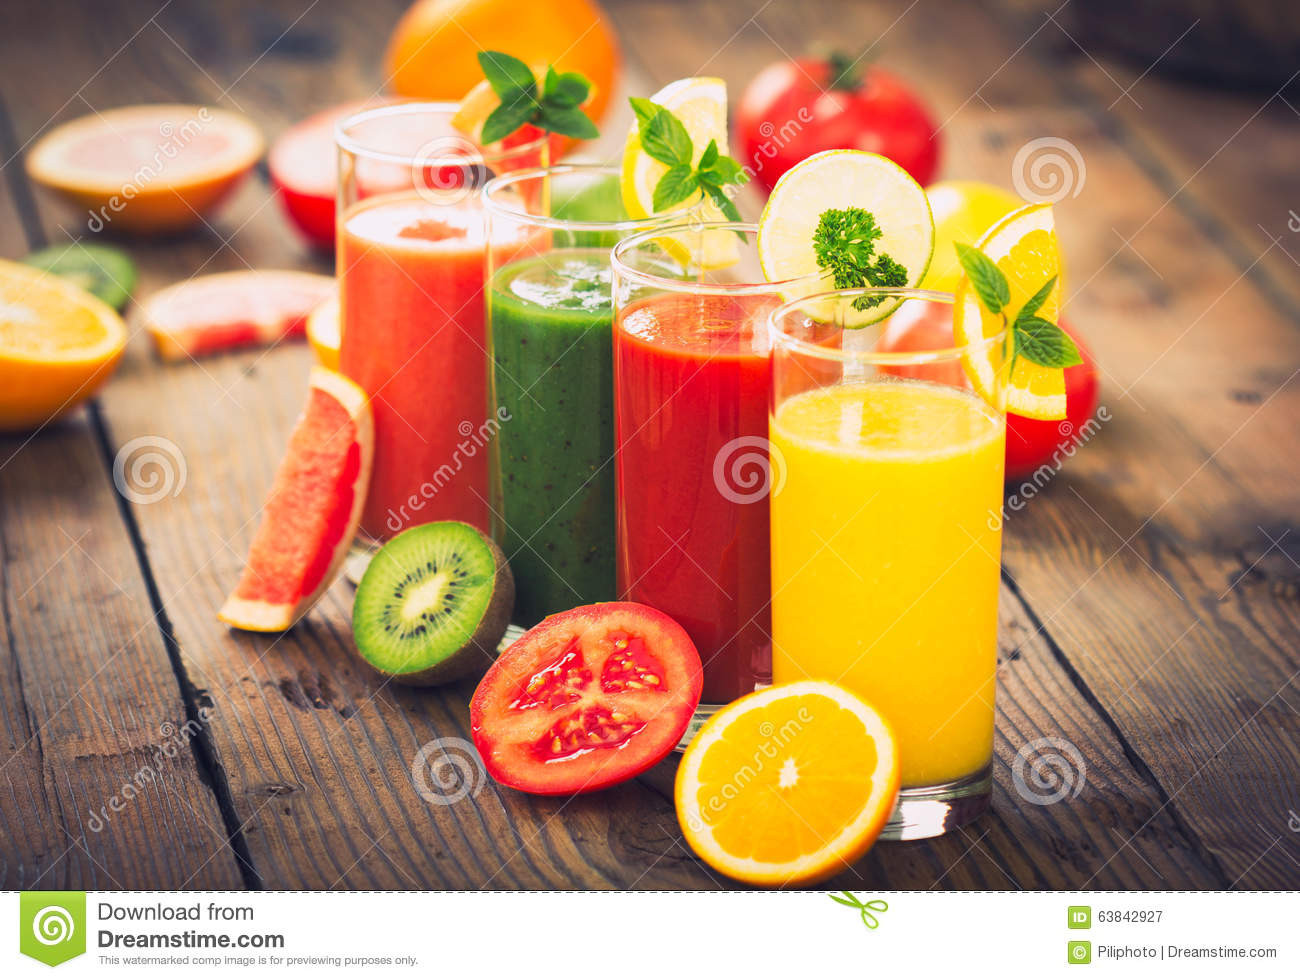 Healthy Fruit And Veggie Smoothies
 Healthy Fruit And Ve able Smoothies Stock Image